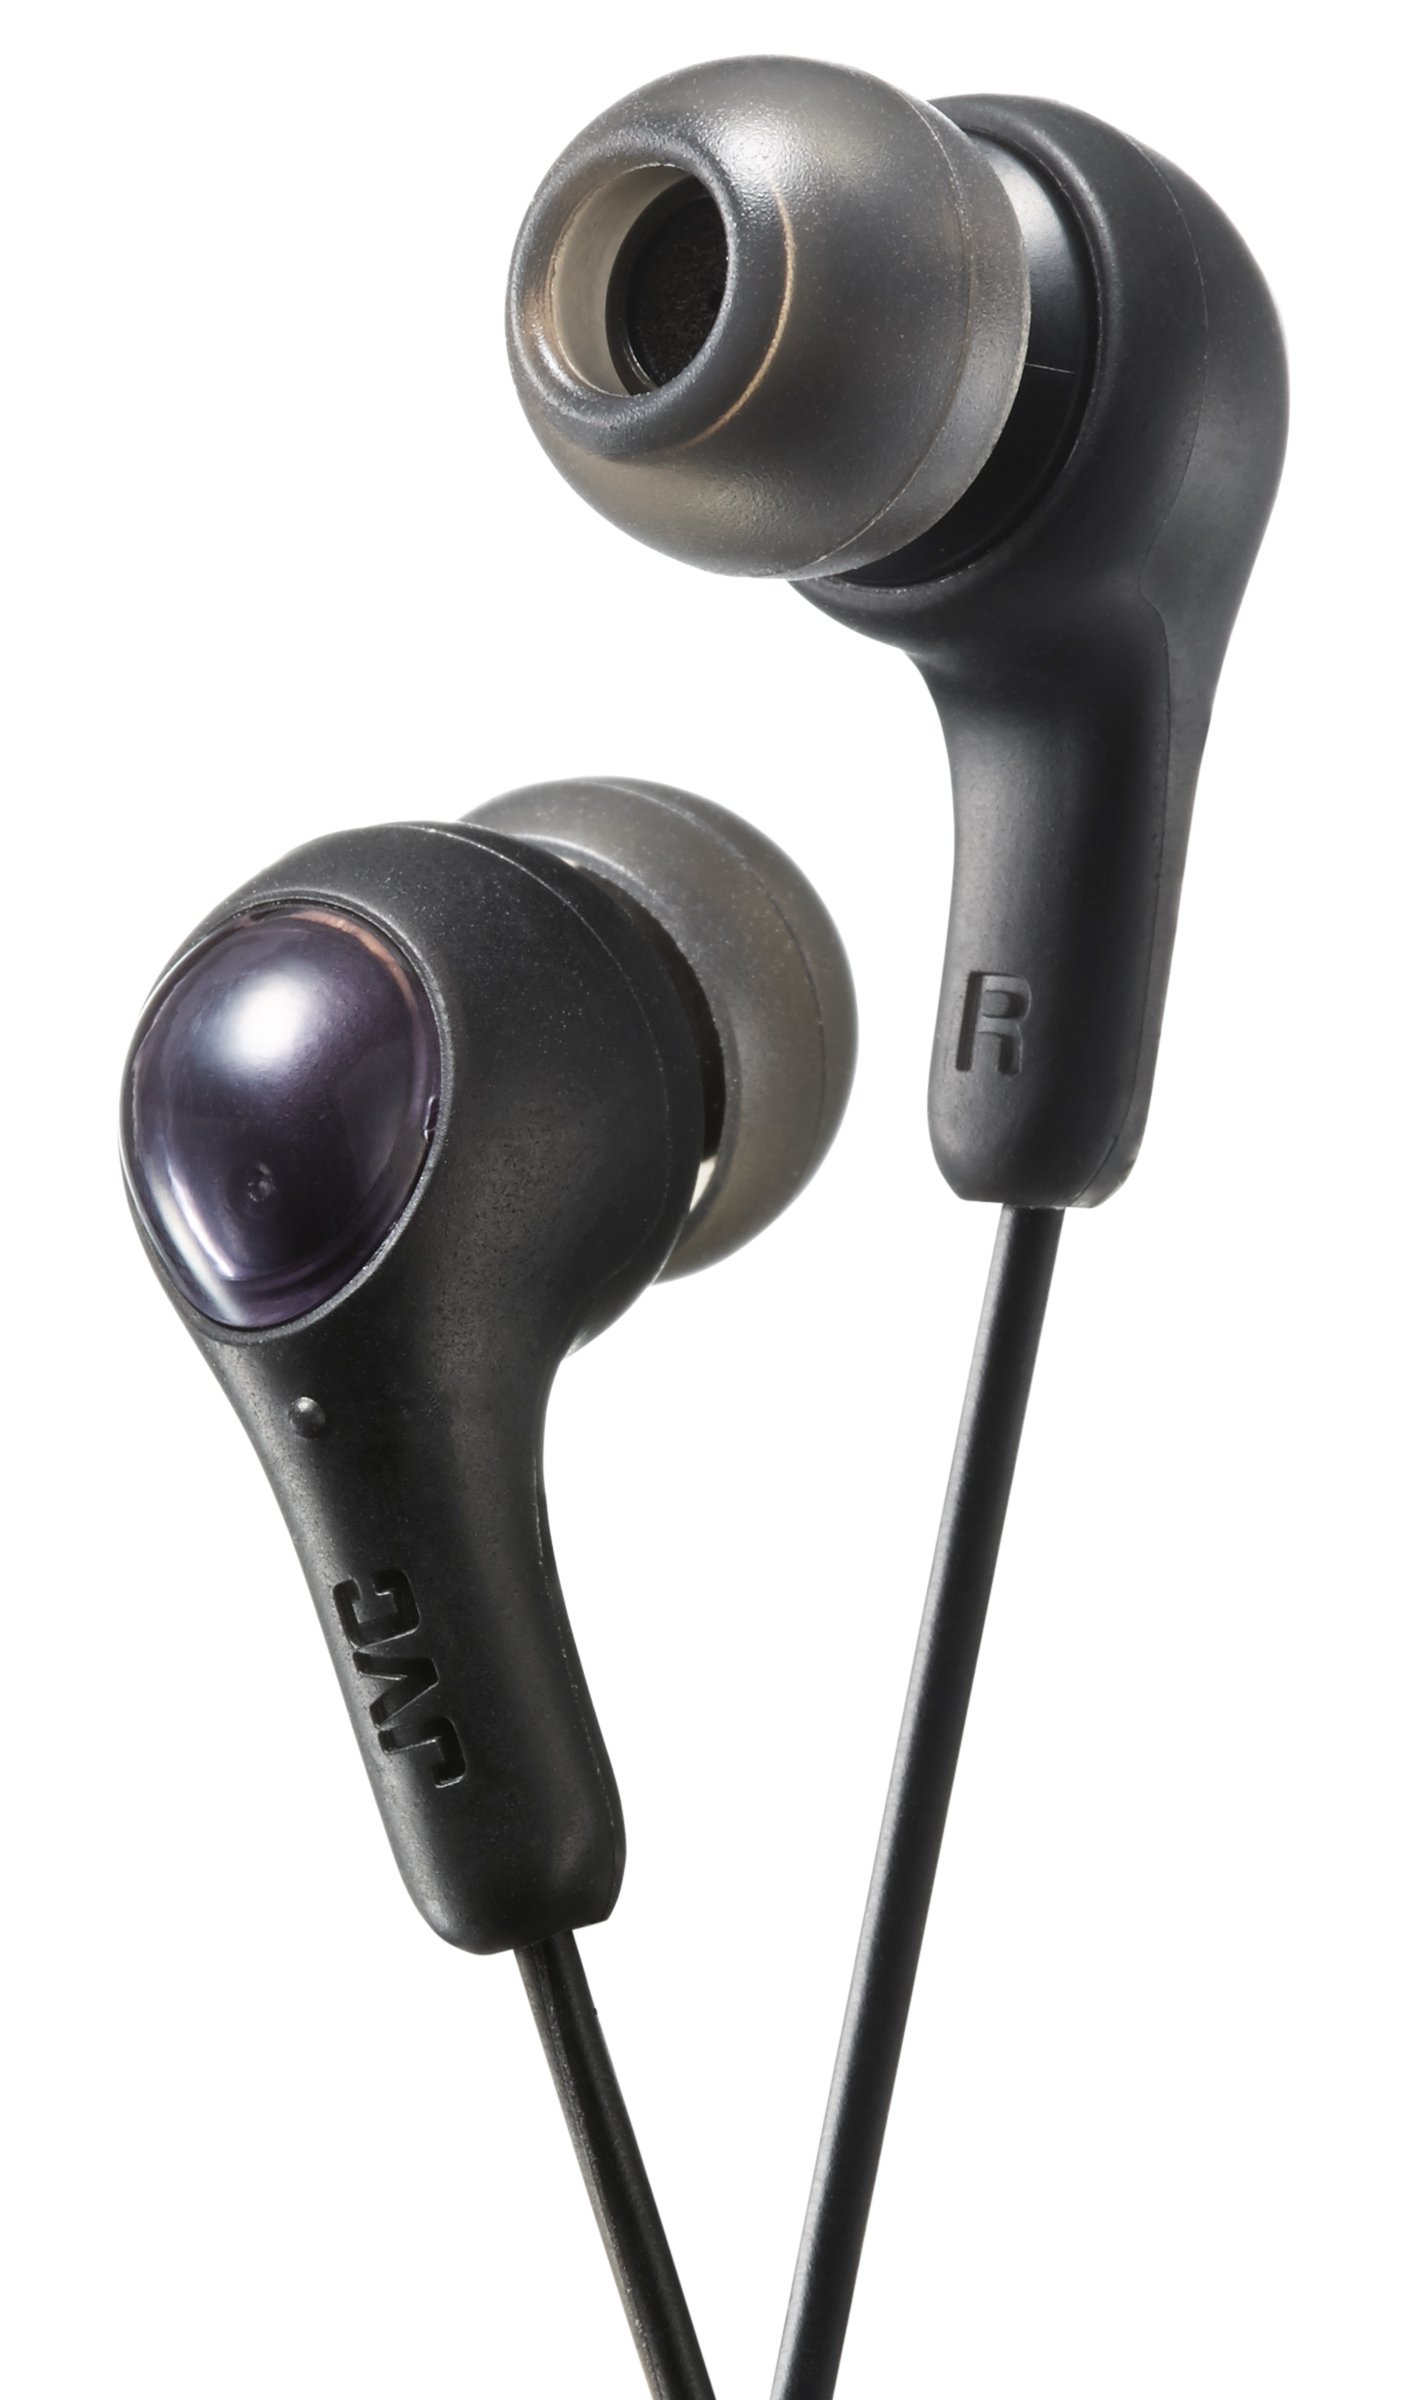 JVC Gumy in Ear Earbud Headphones, Powerful Sound, Comfortable and Secure Fit, Silicone Ear Pieces S/M/L - HAFX7B Black